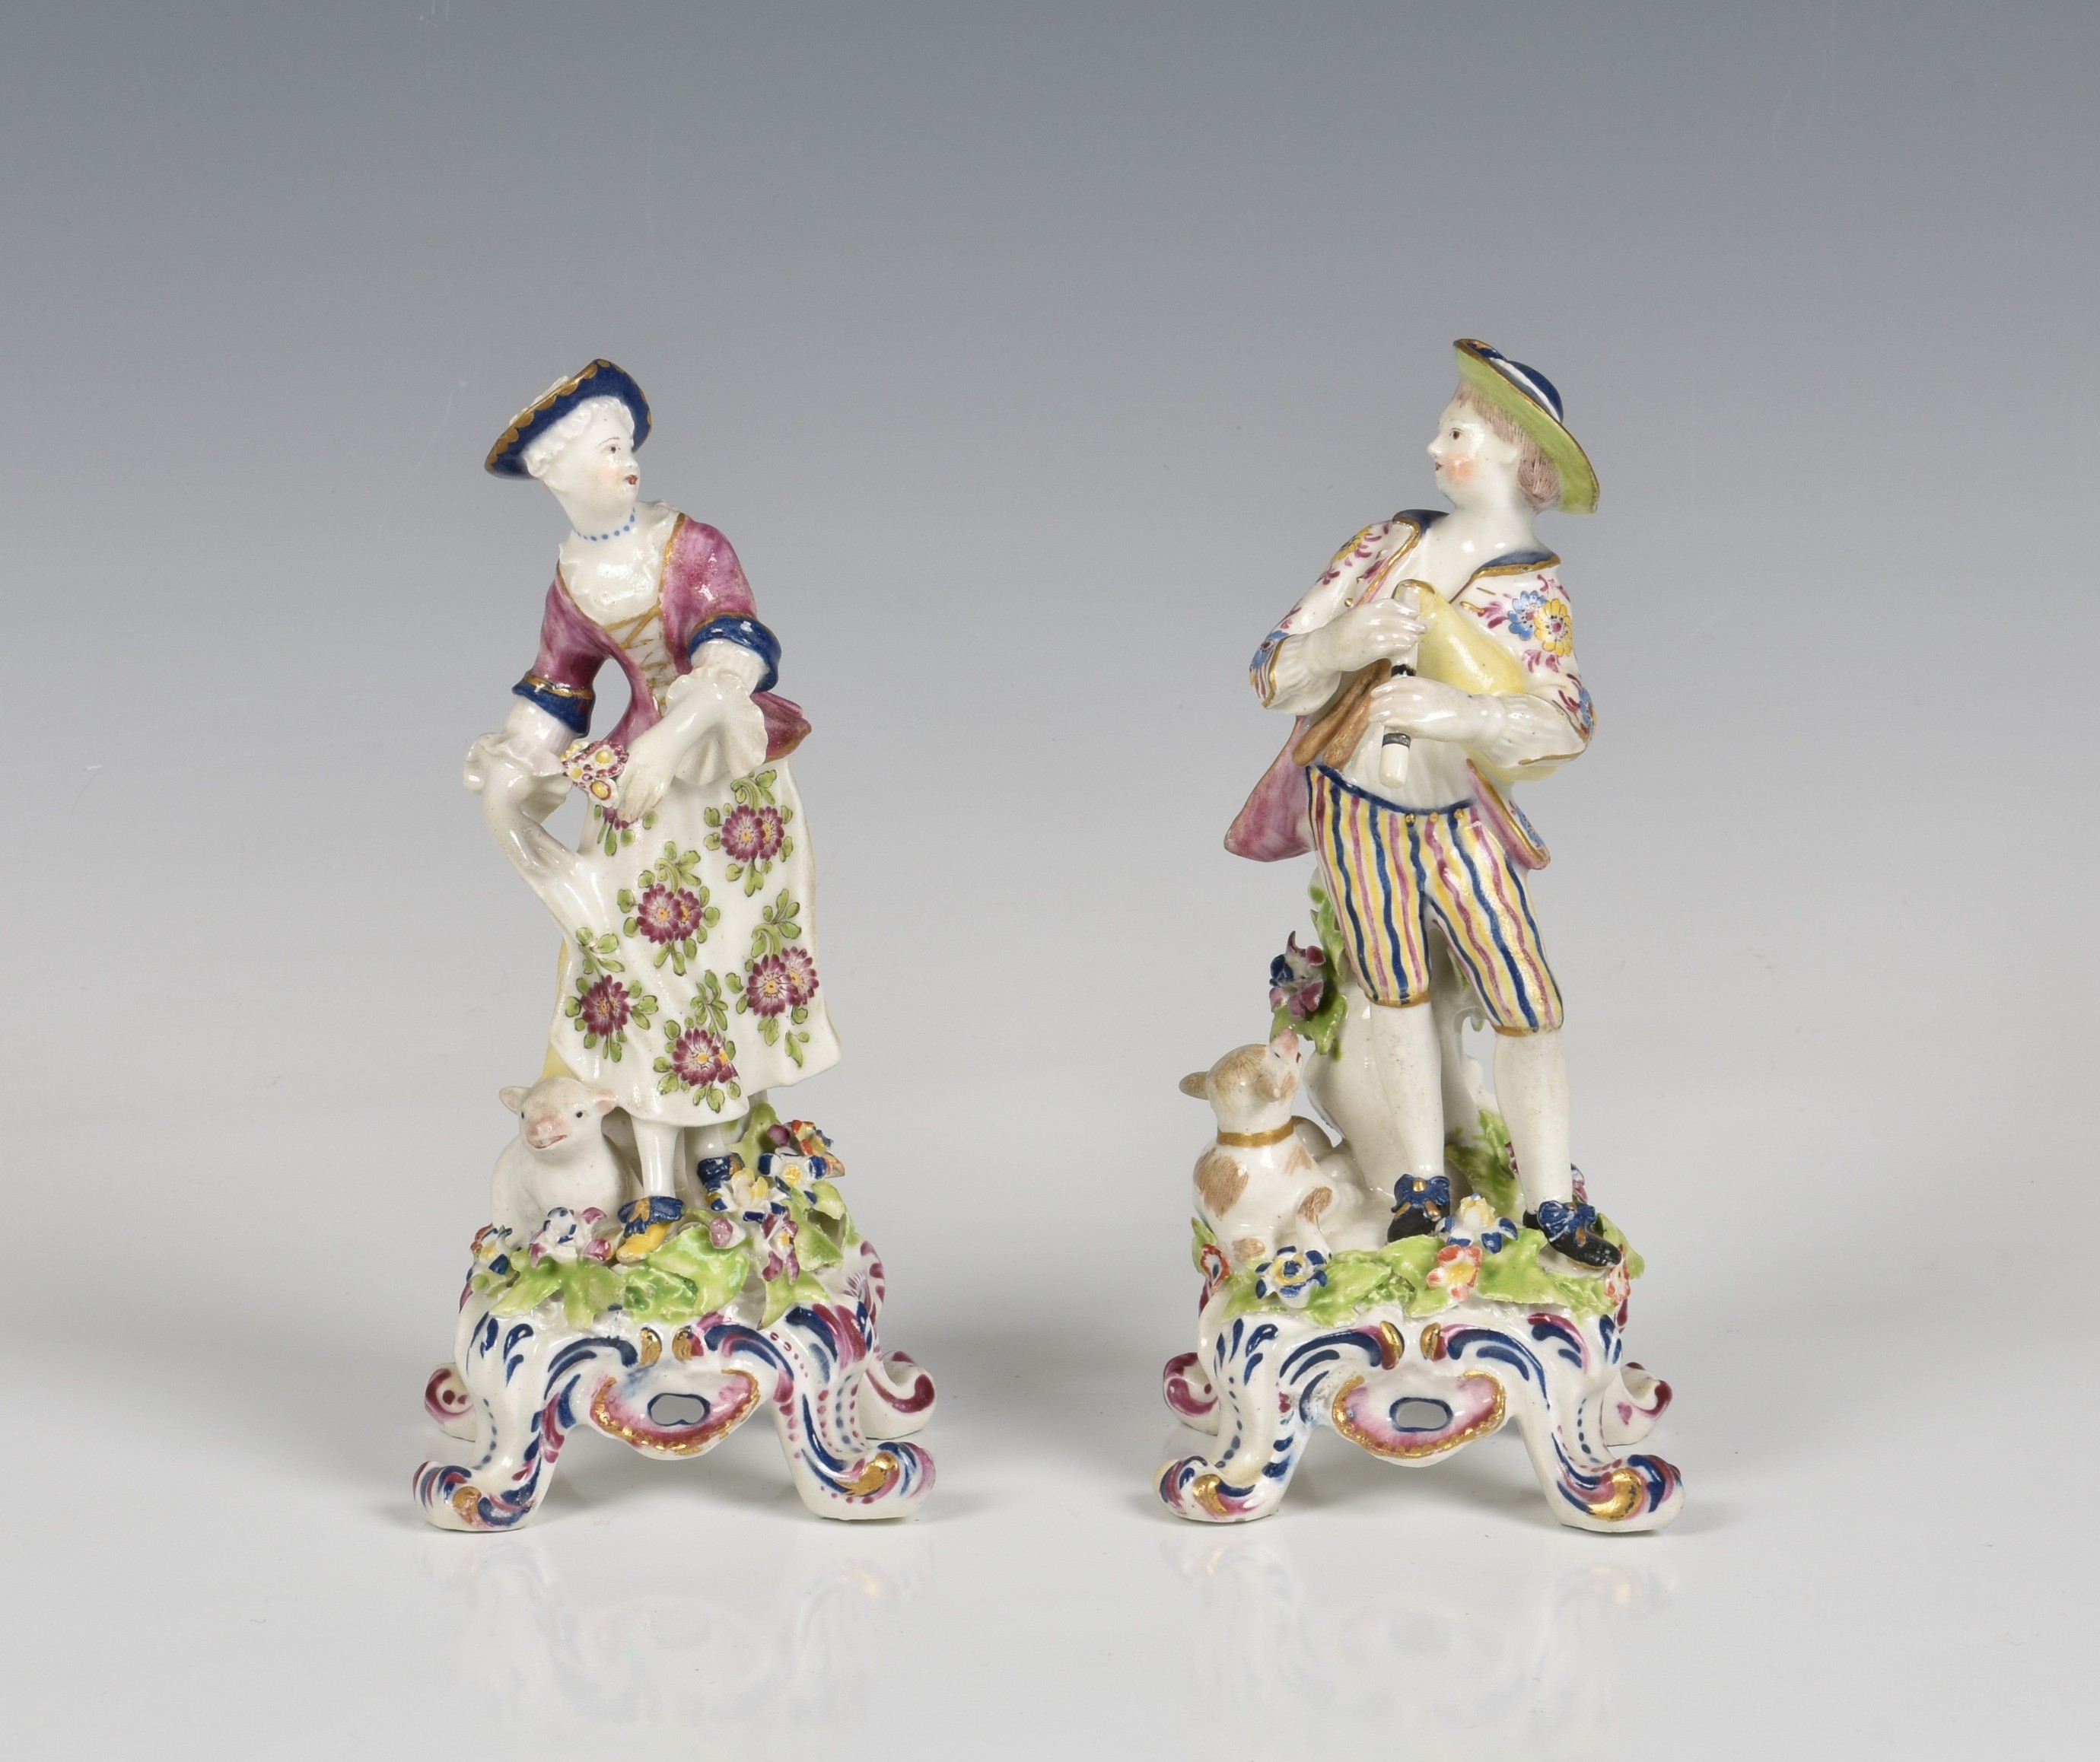 A pair of Bow porcelain figures of a shepherd and shepherdess